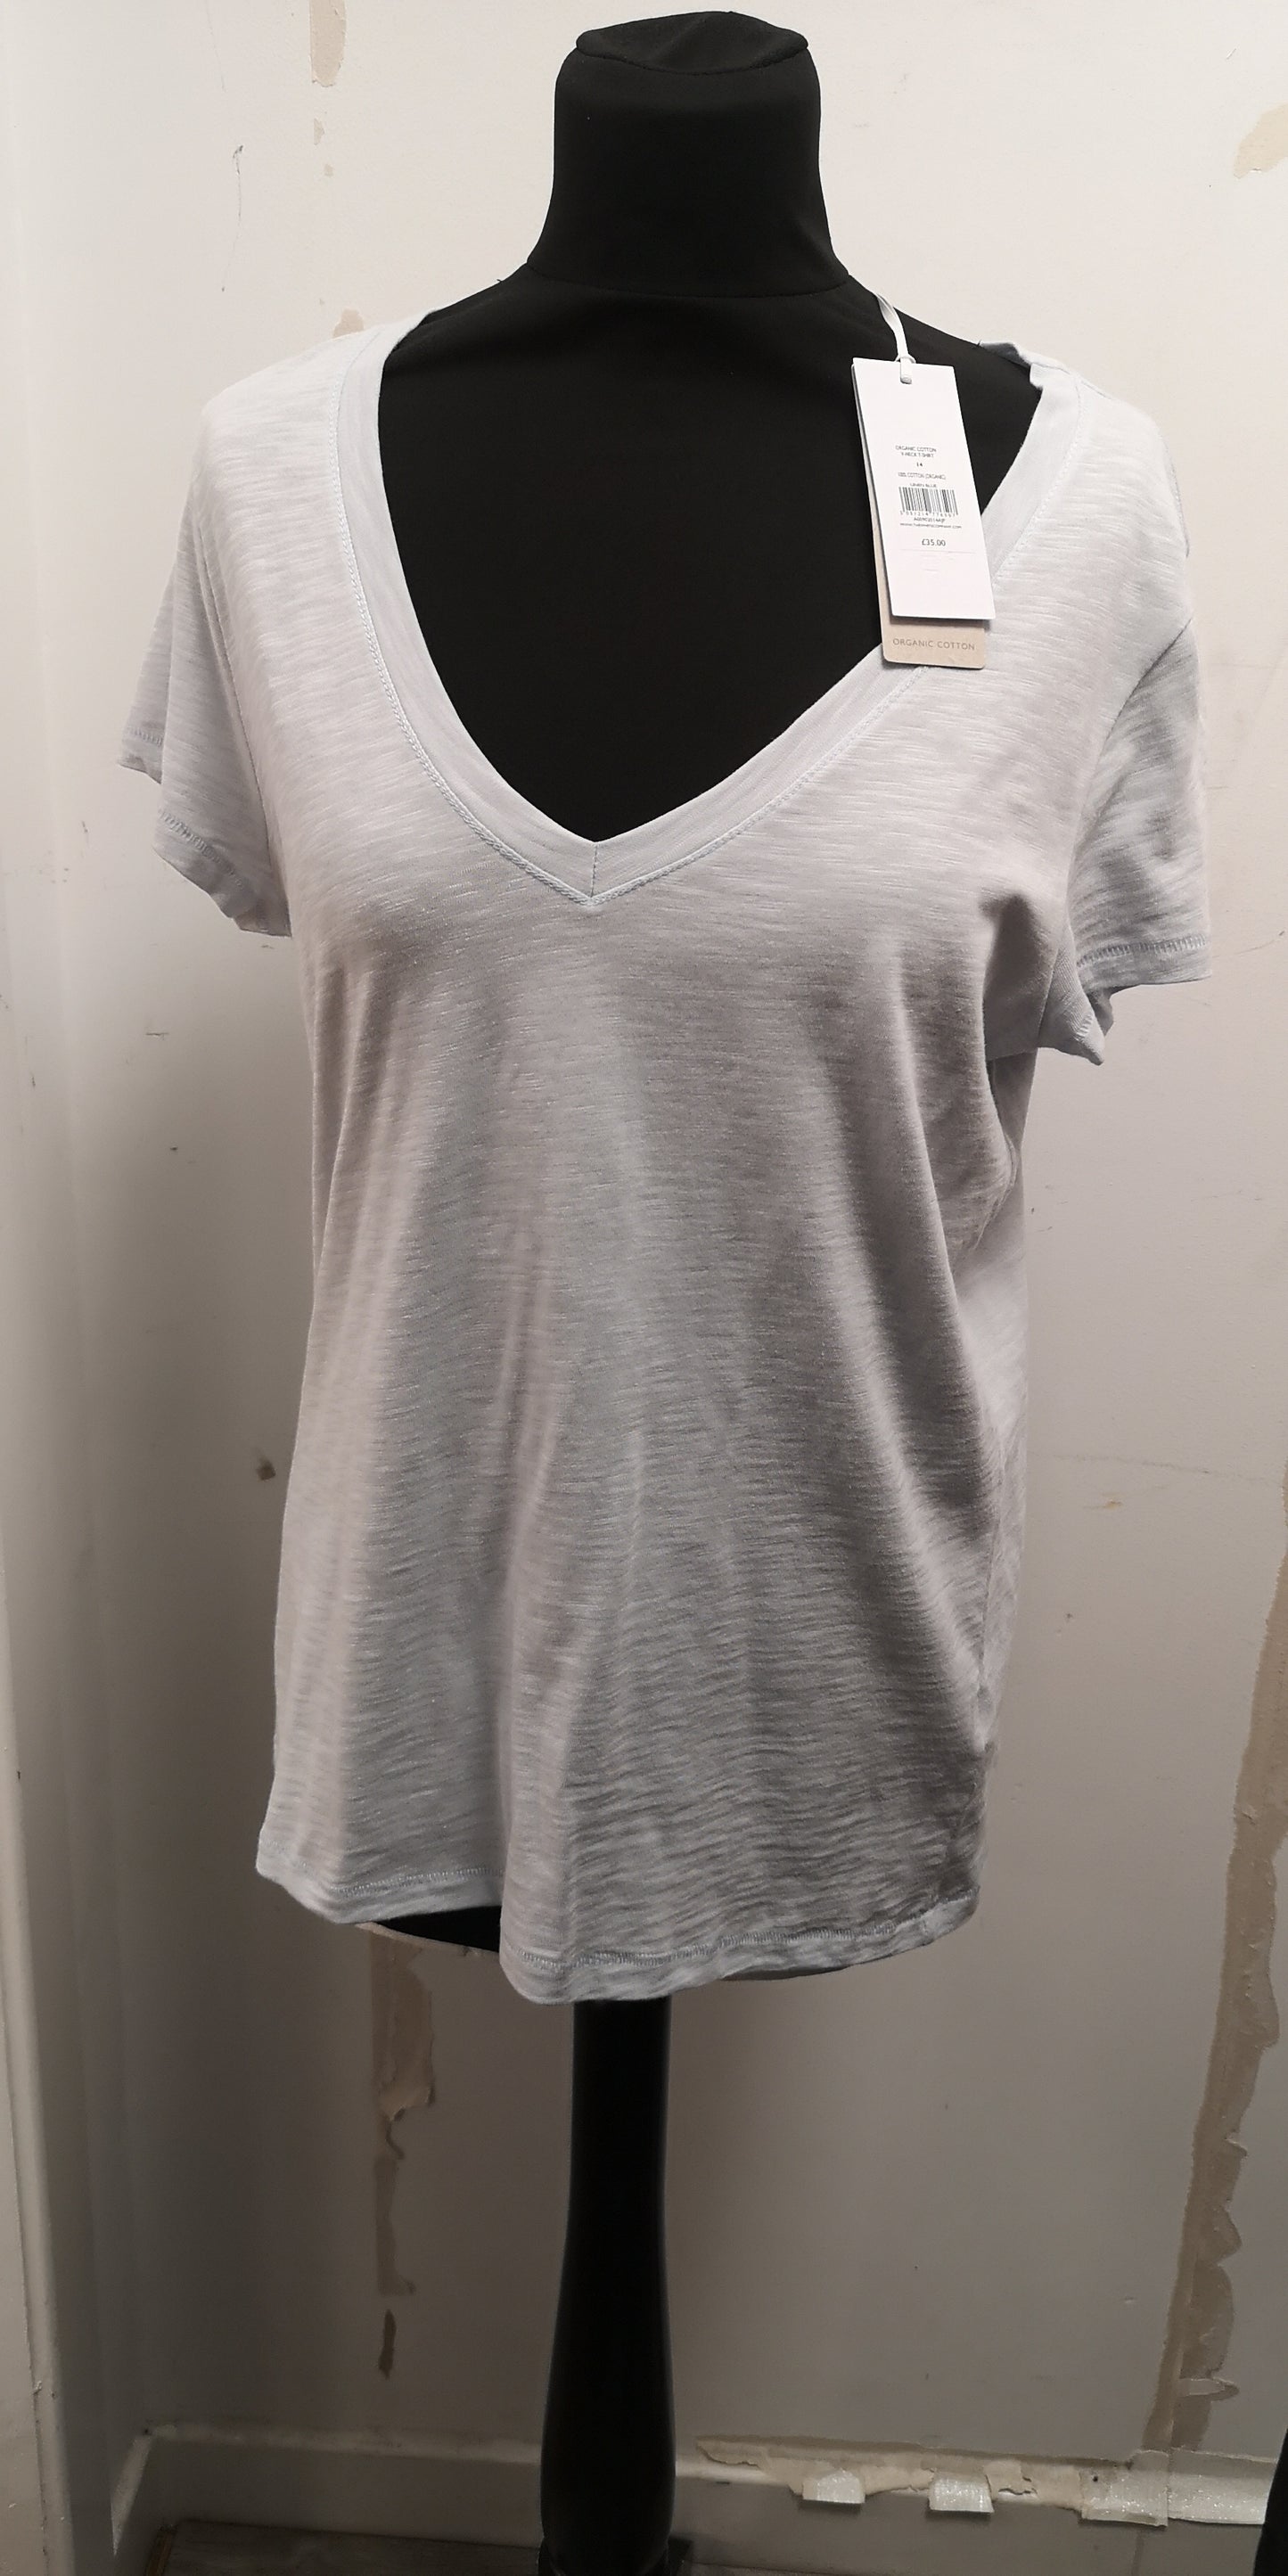 BNWT White Label Baby Blue Top Size 14